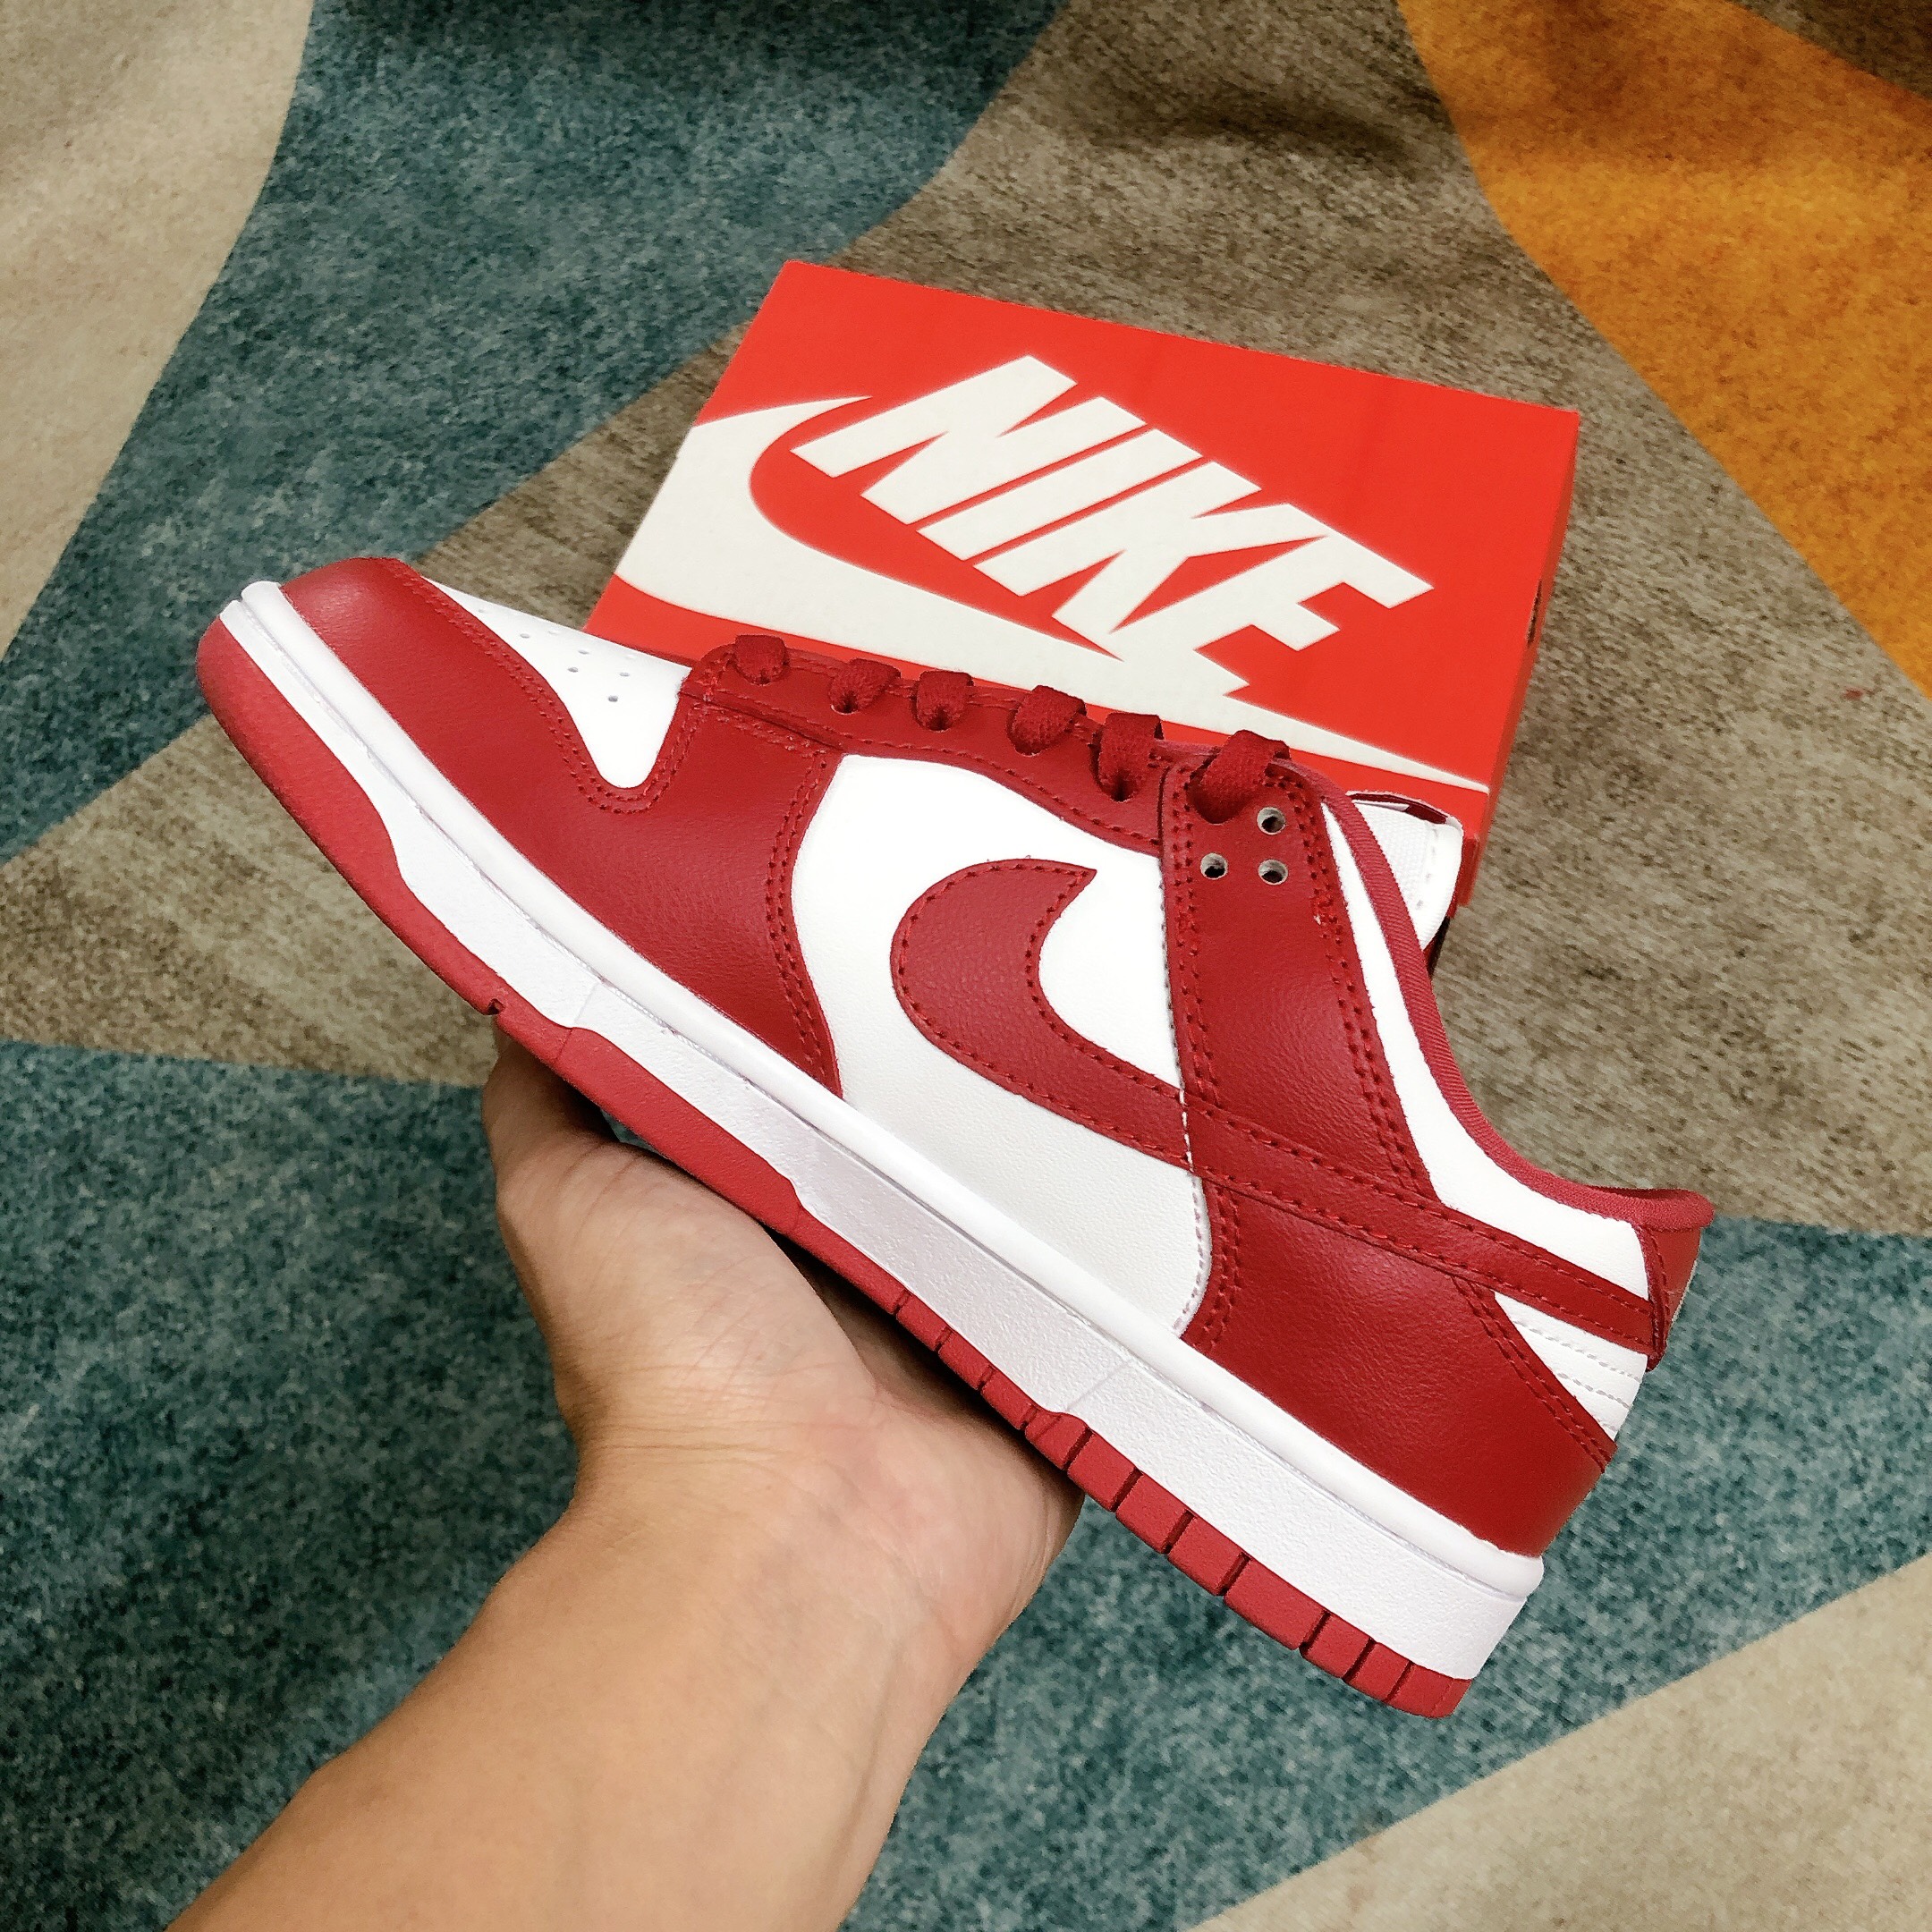 Giày Nike SB Dunk Low Chicago University Red Like Auth